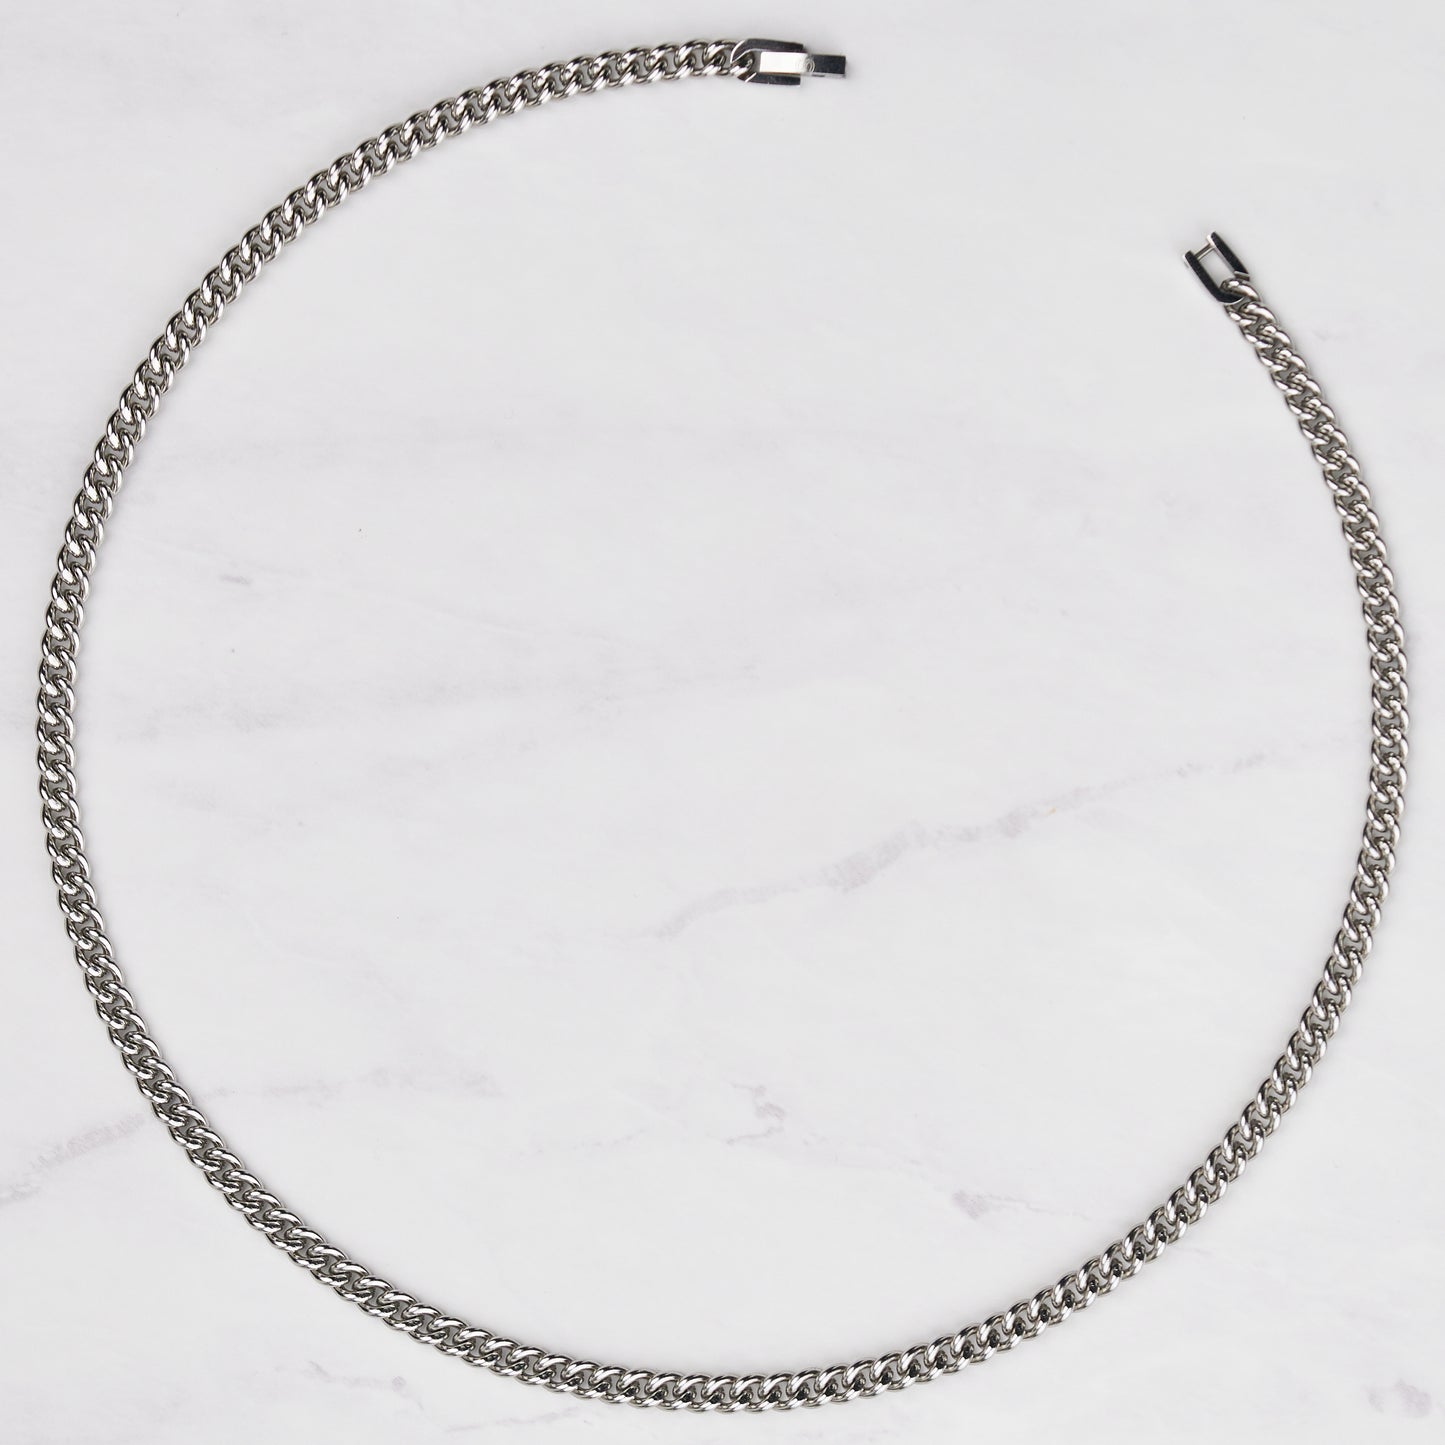 Victoria Necklace in White Gold - 5mm